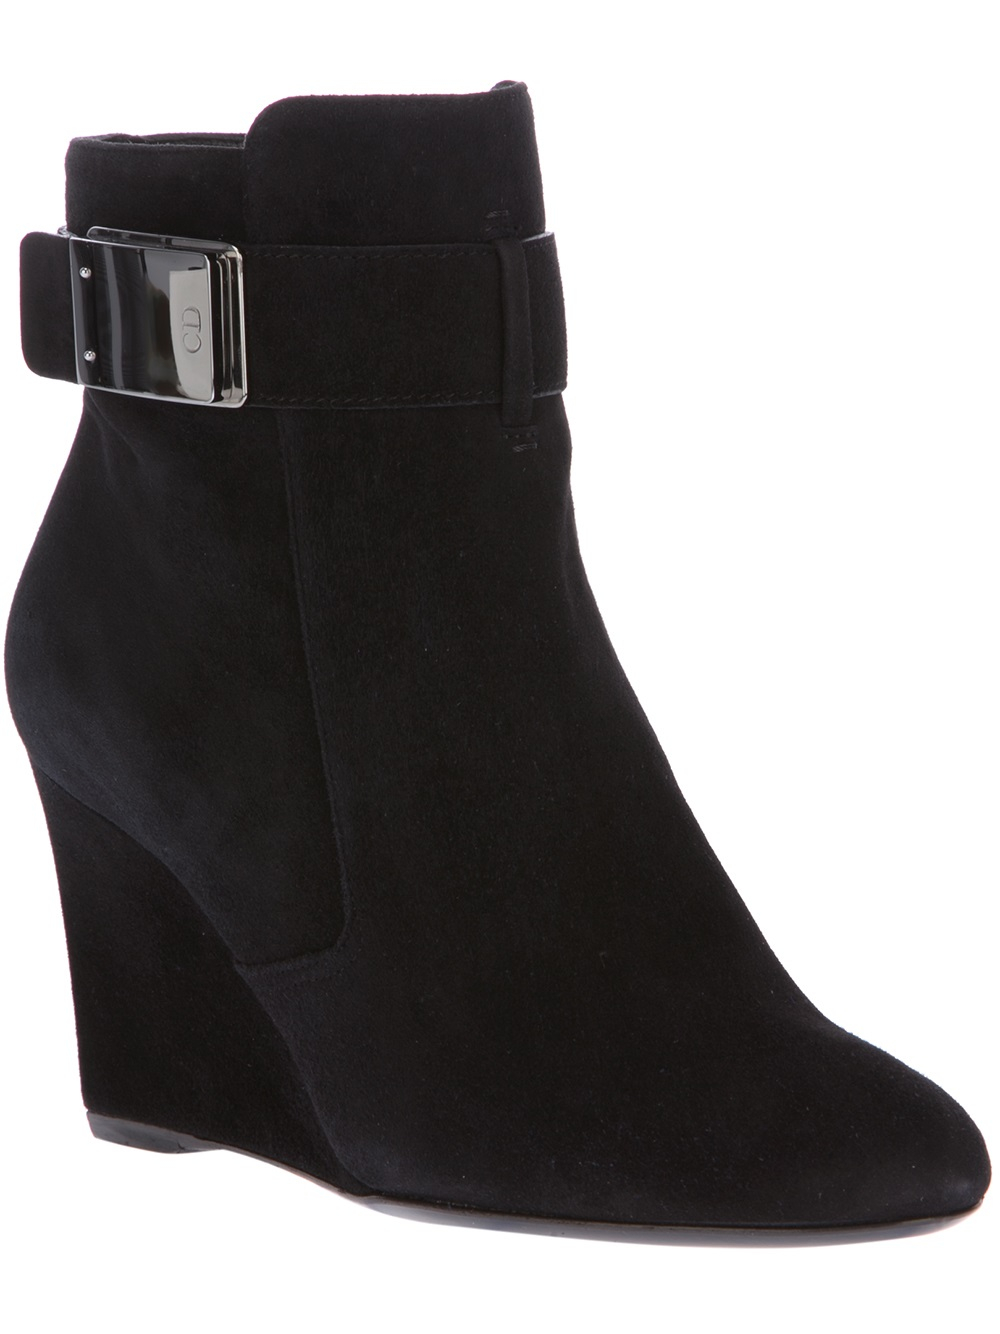 Lyst - Dior Wedge Ankle Boot in Black